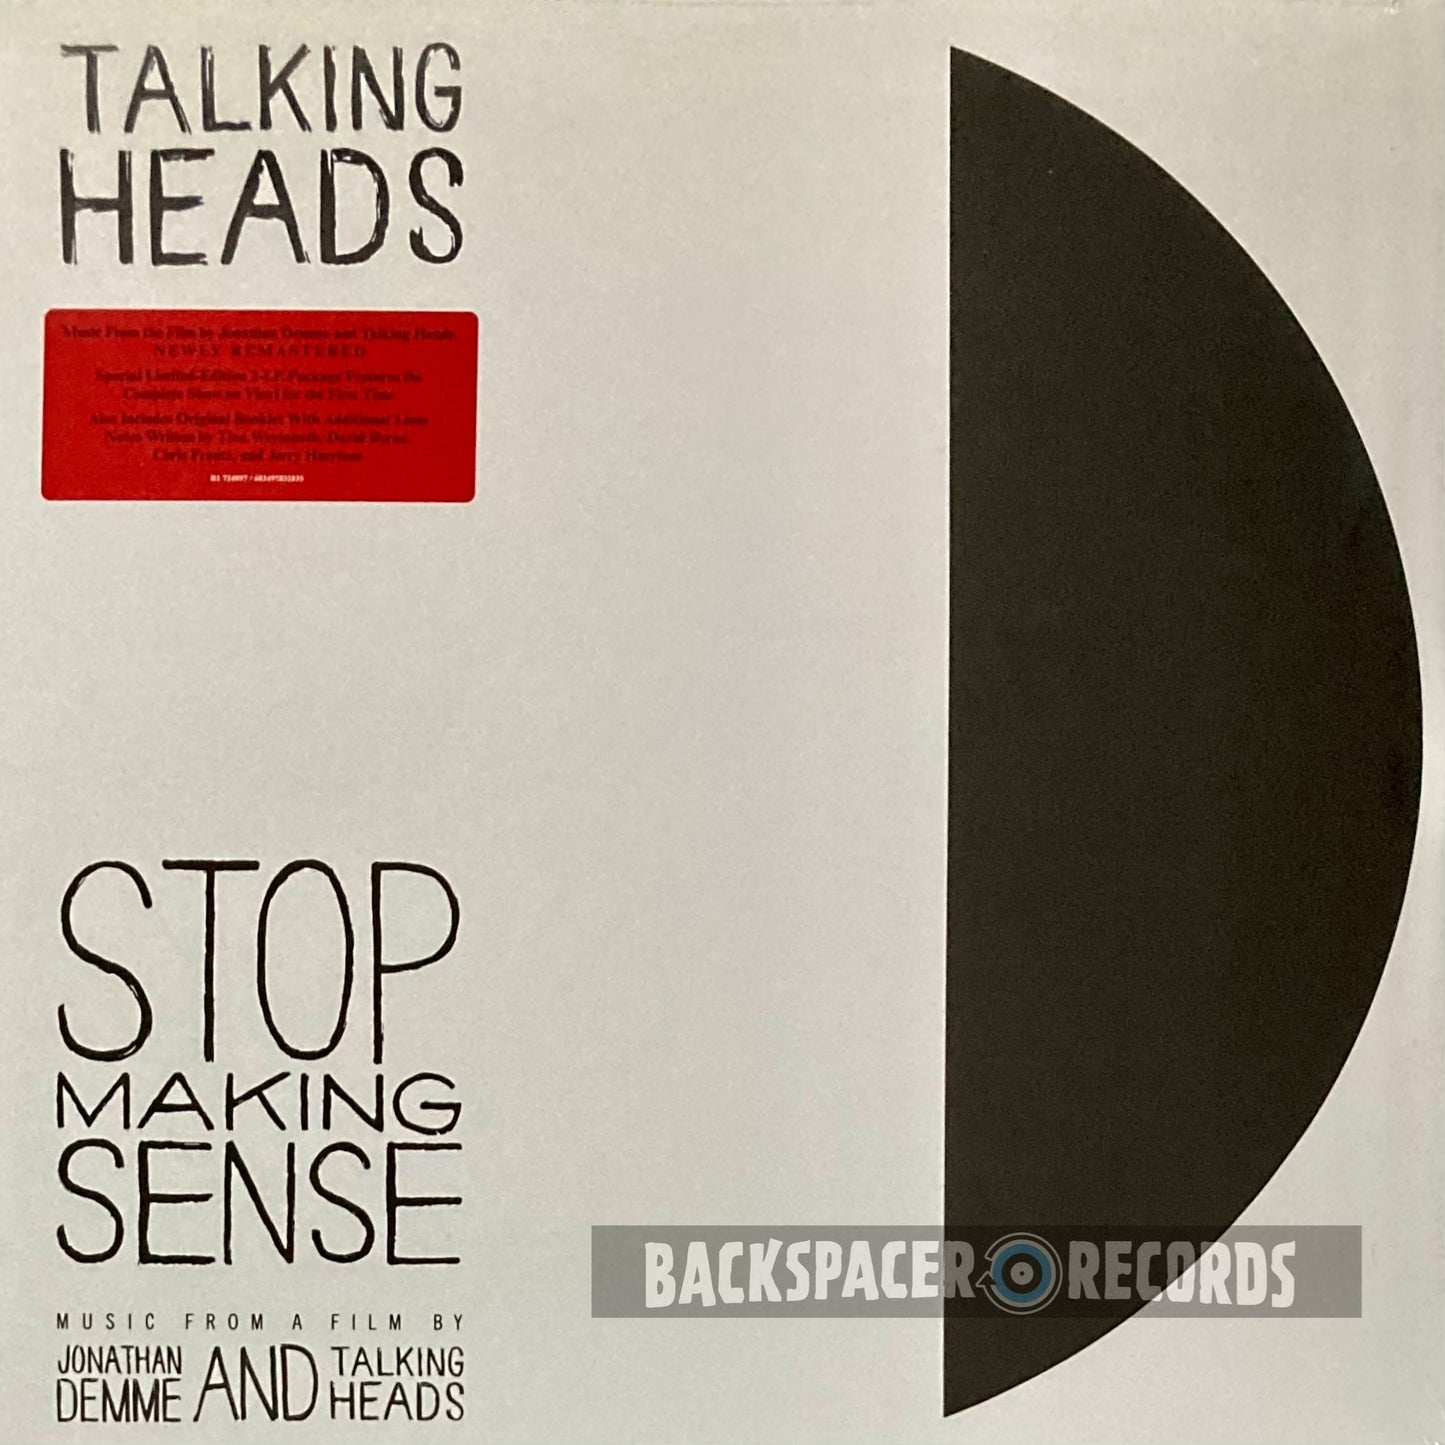 Talking Heads – Stop Making Sense: Music From A Film By Jonathan Demme And Talking Heads (Limited Edition) 2-LP (Sealed)